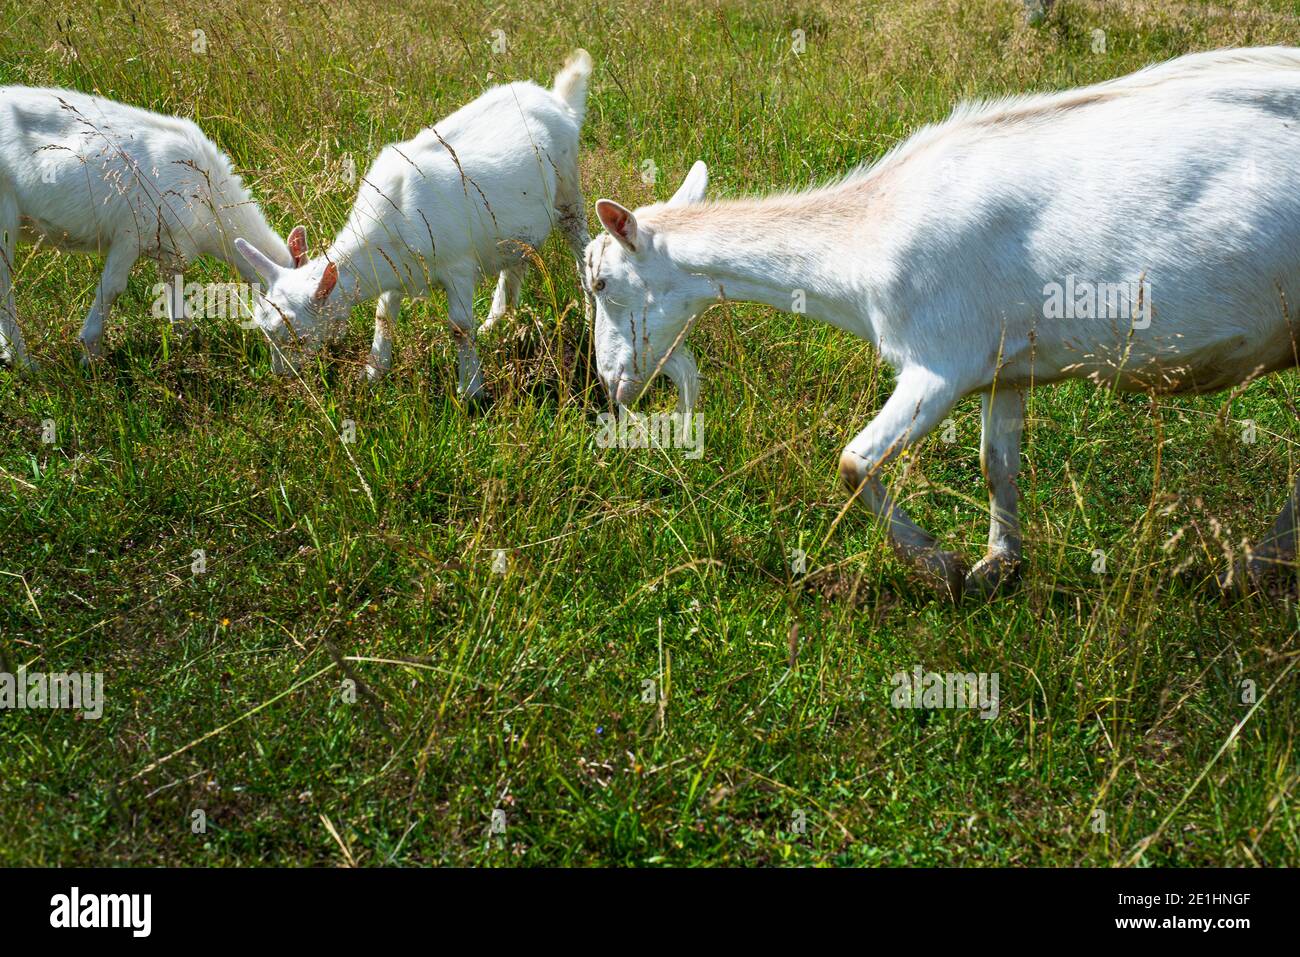 White hornless goat in a green pasture. Stock Photo